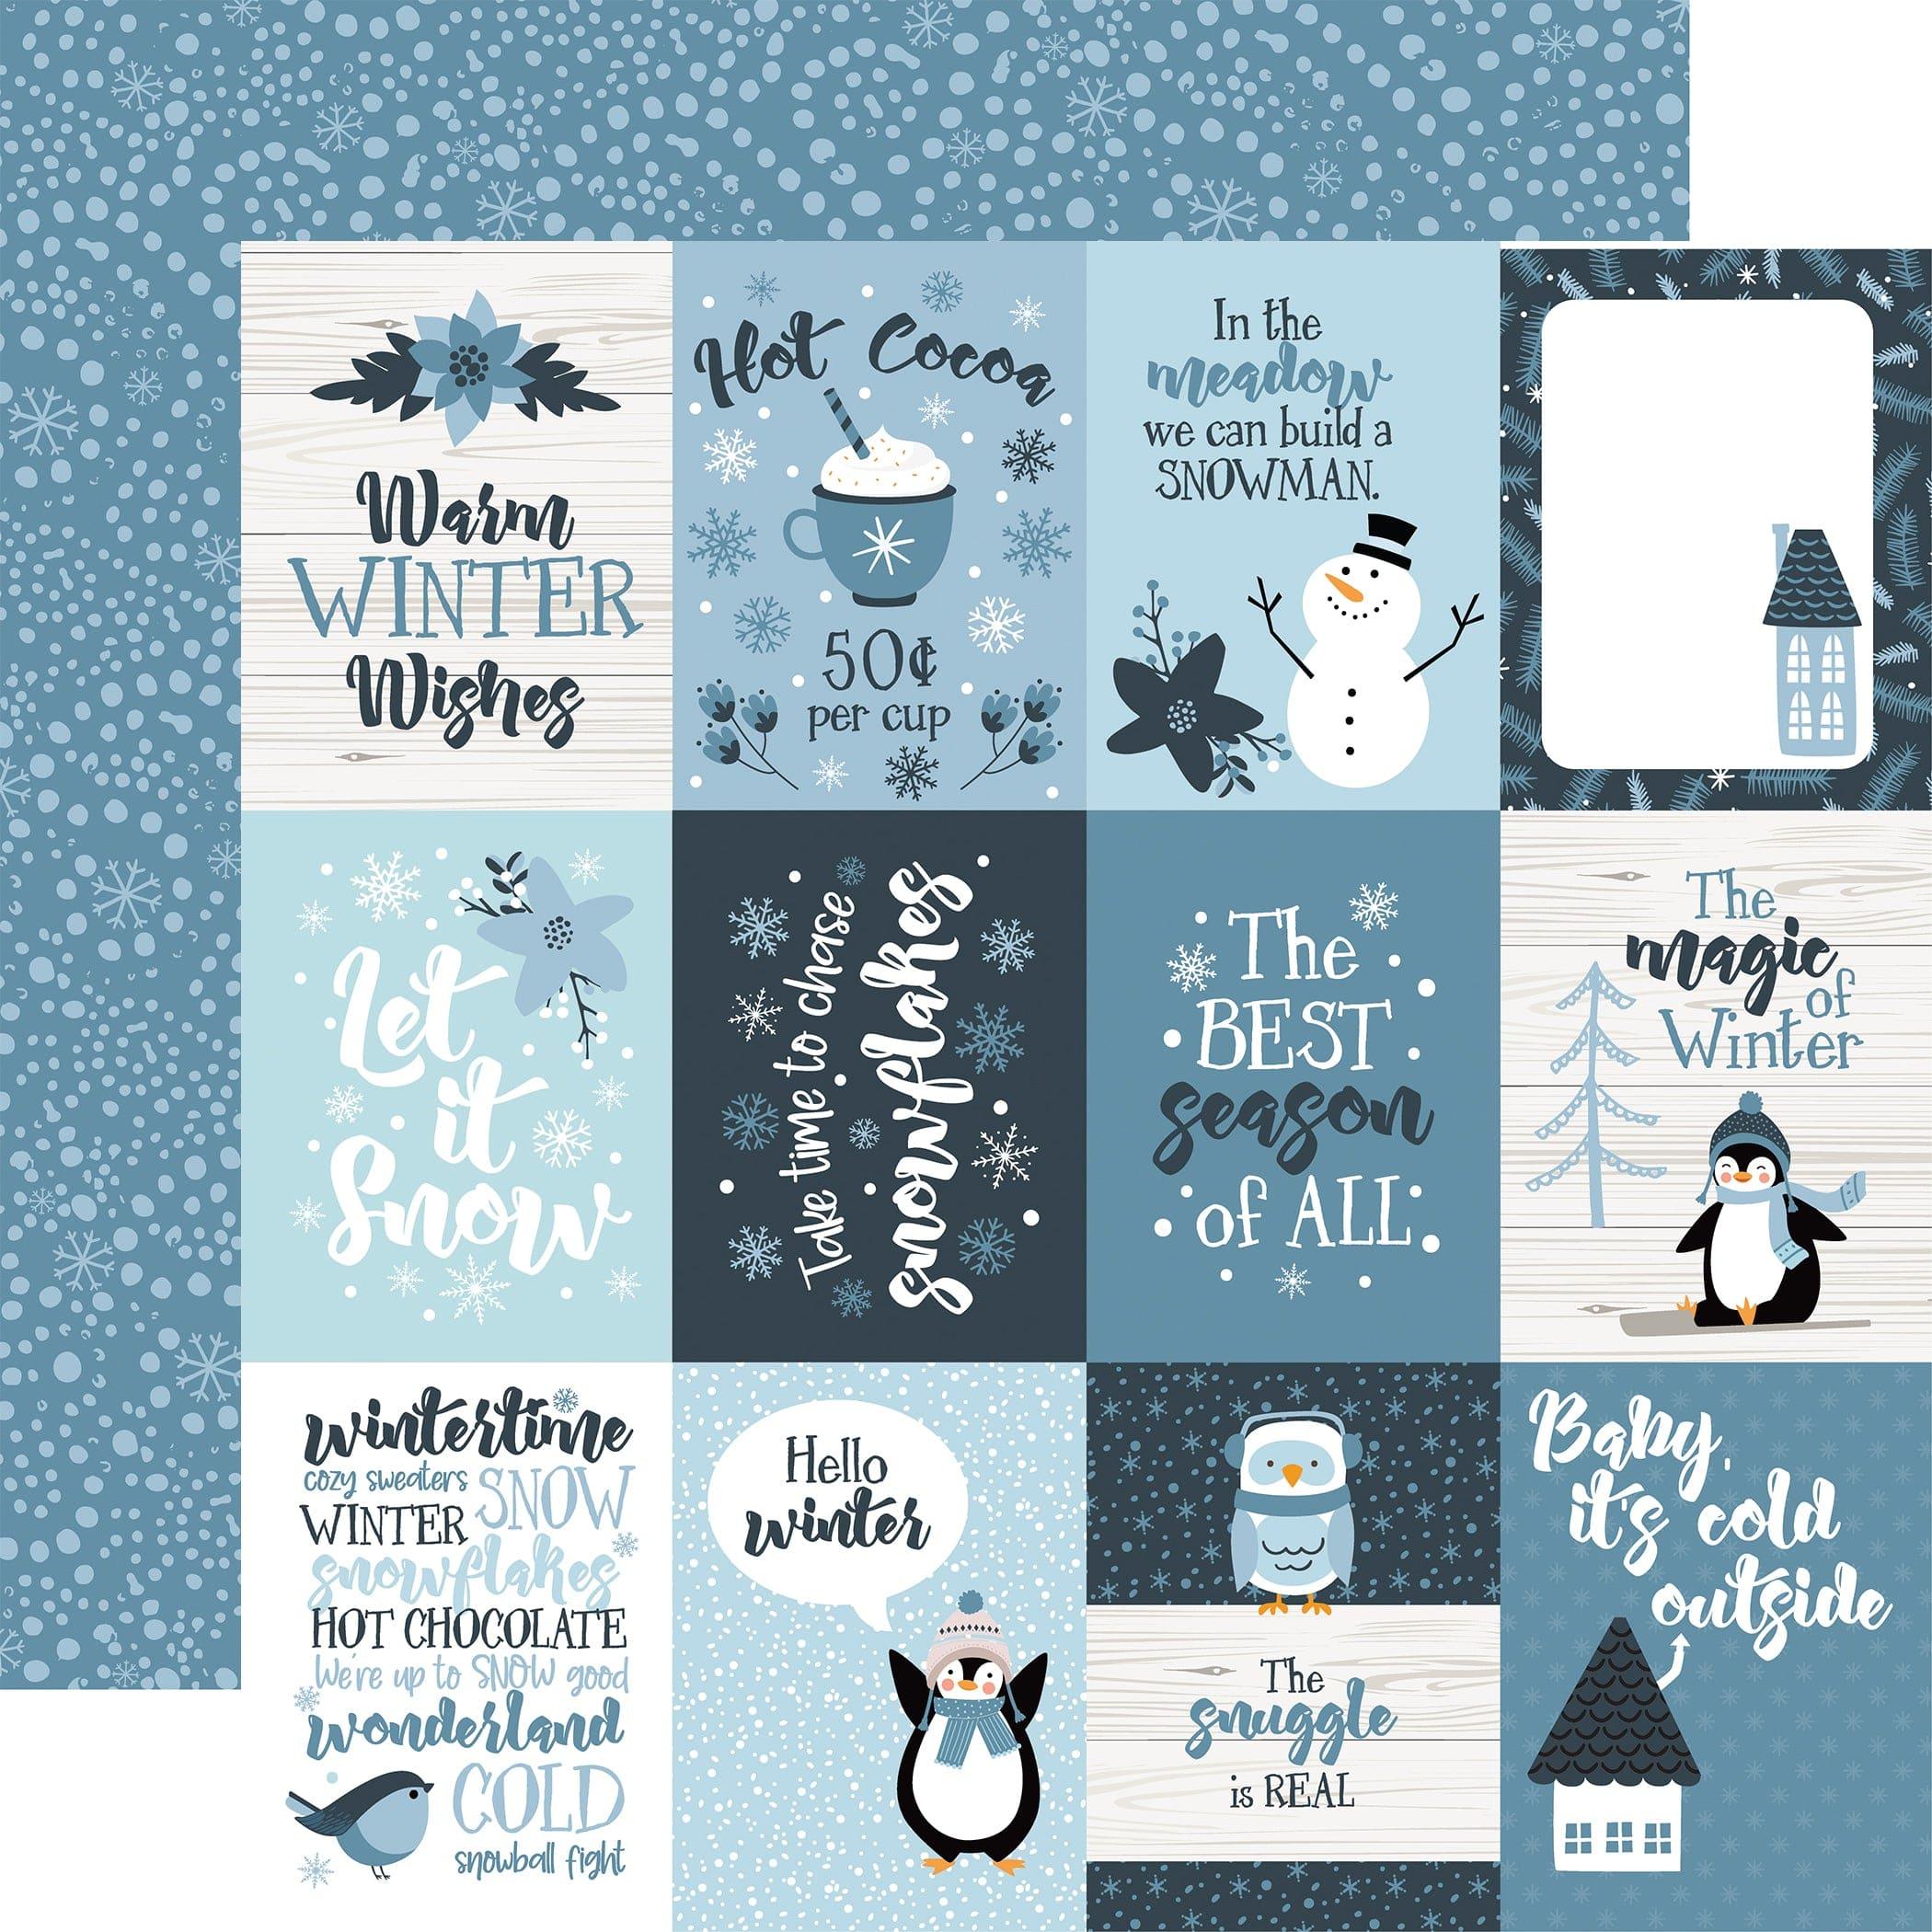 Winter Magic Paper Pack #2 - Snap Click Supply Co.